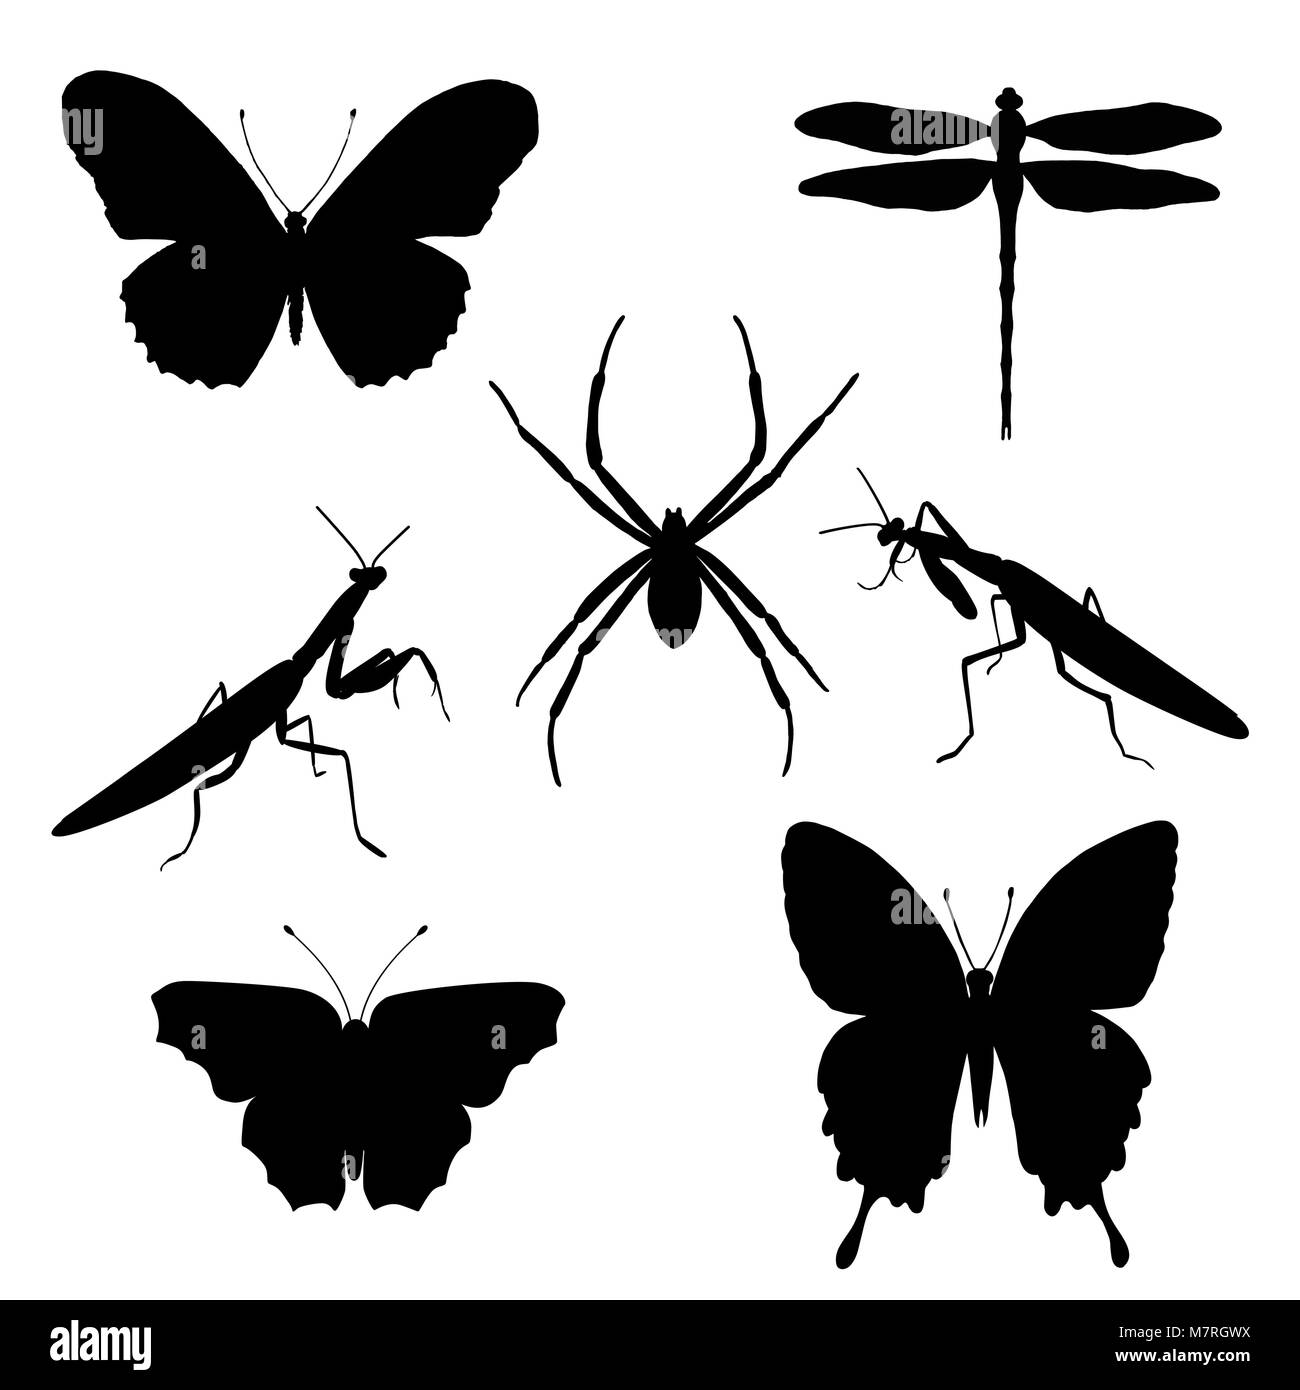 Vector set of silhouettes of insects - butterflies, spider, mantises, dragonfly. Insect silhouette Stock Vector